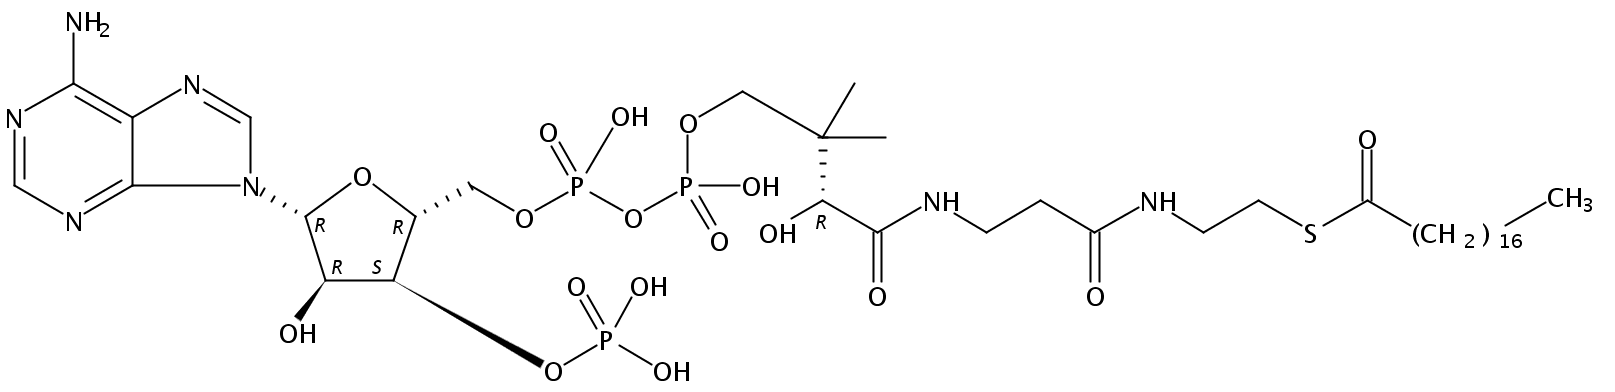 Structural formula of Octadecanoyl Coenzyme A free acid